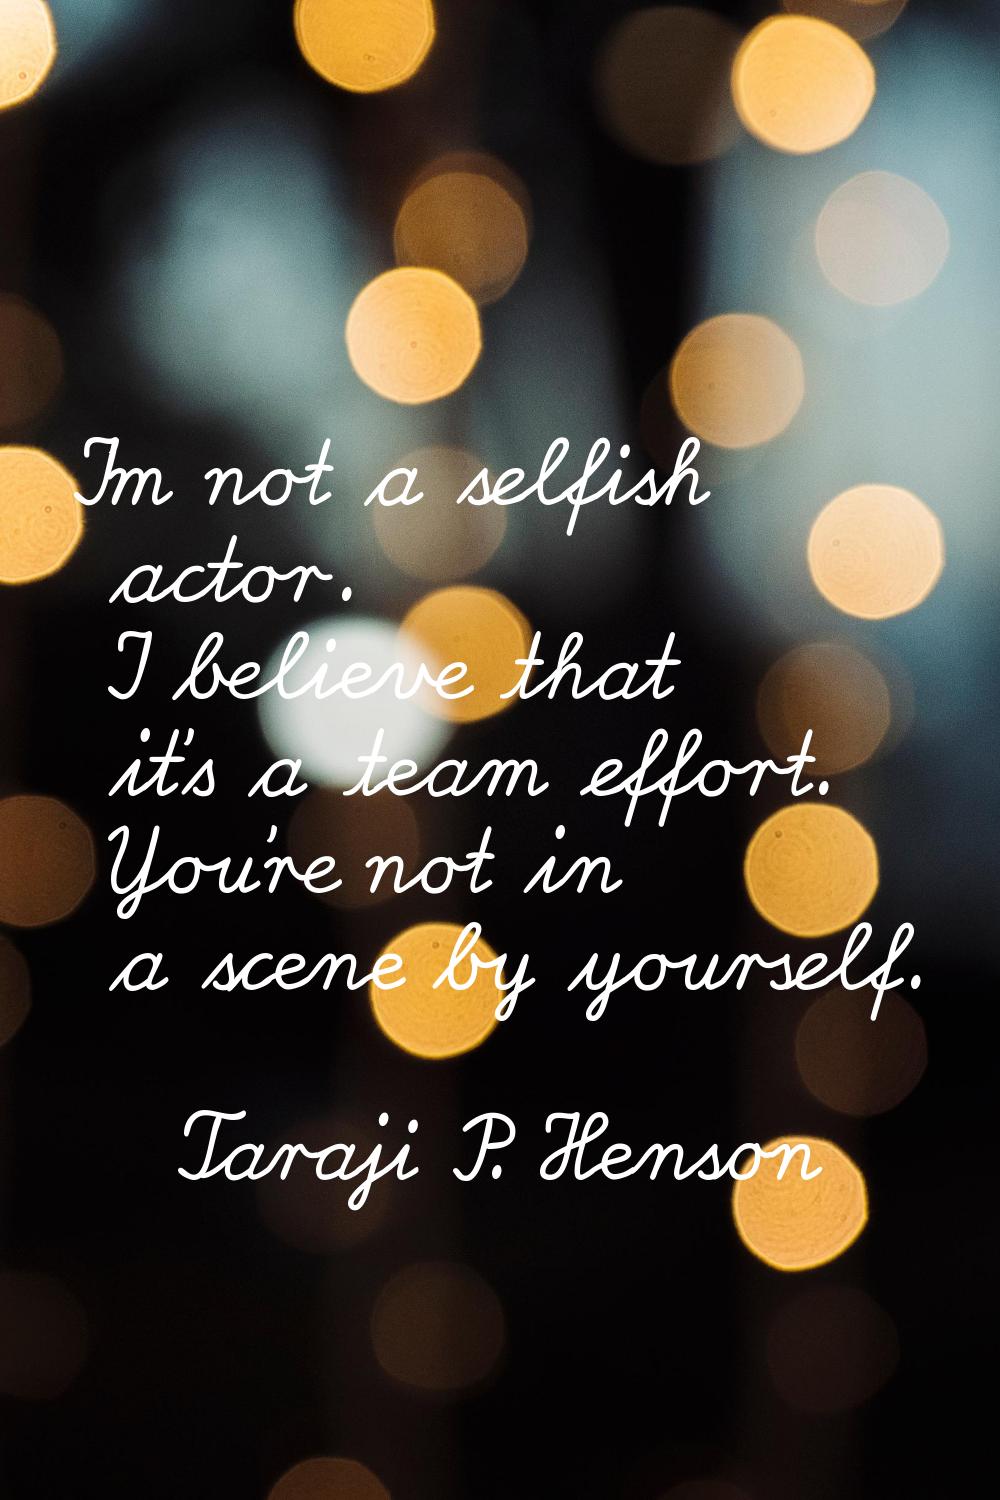 I'm not a selfish actor. I believe that it's a team effort. You're not in a scene by yourself.